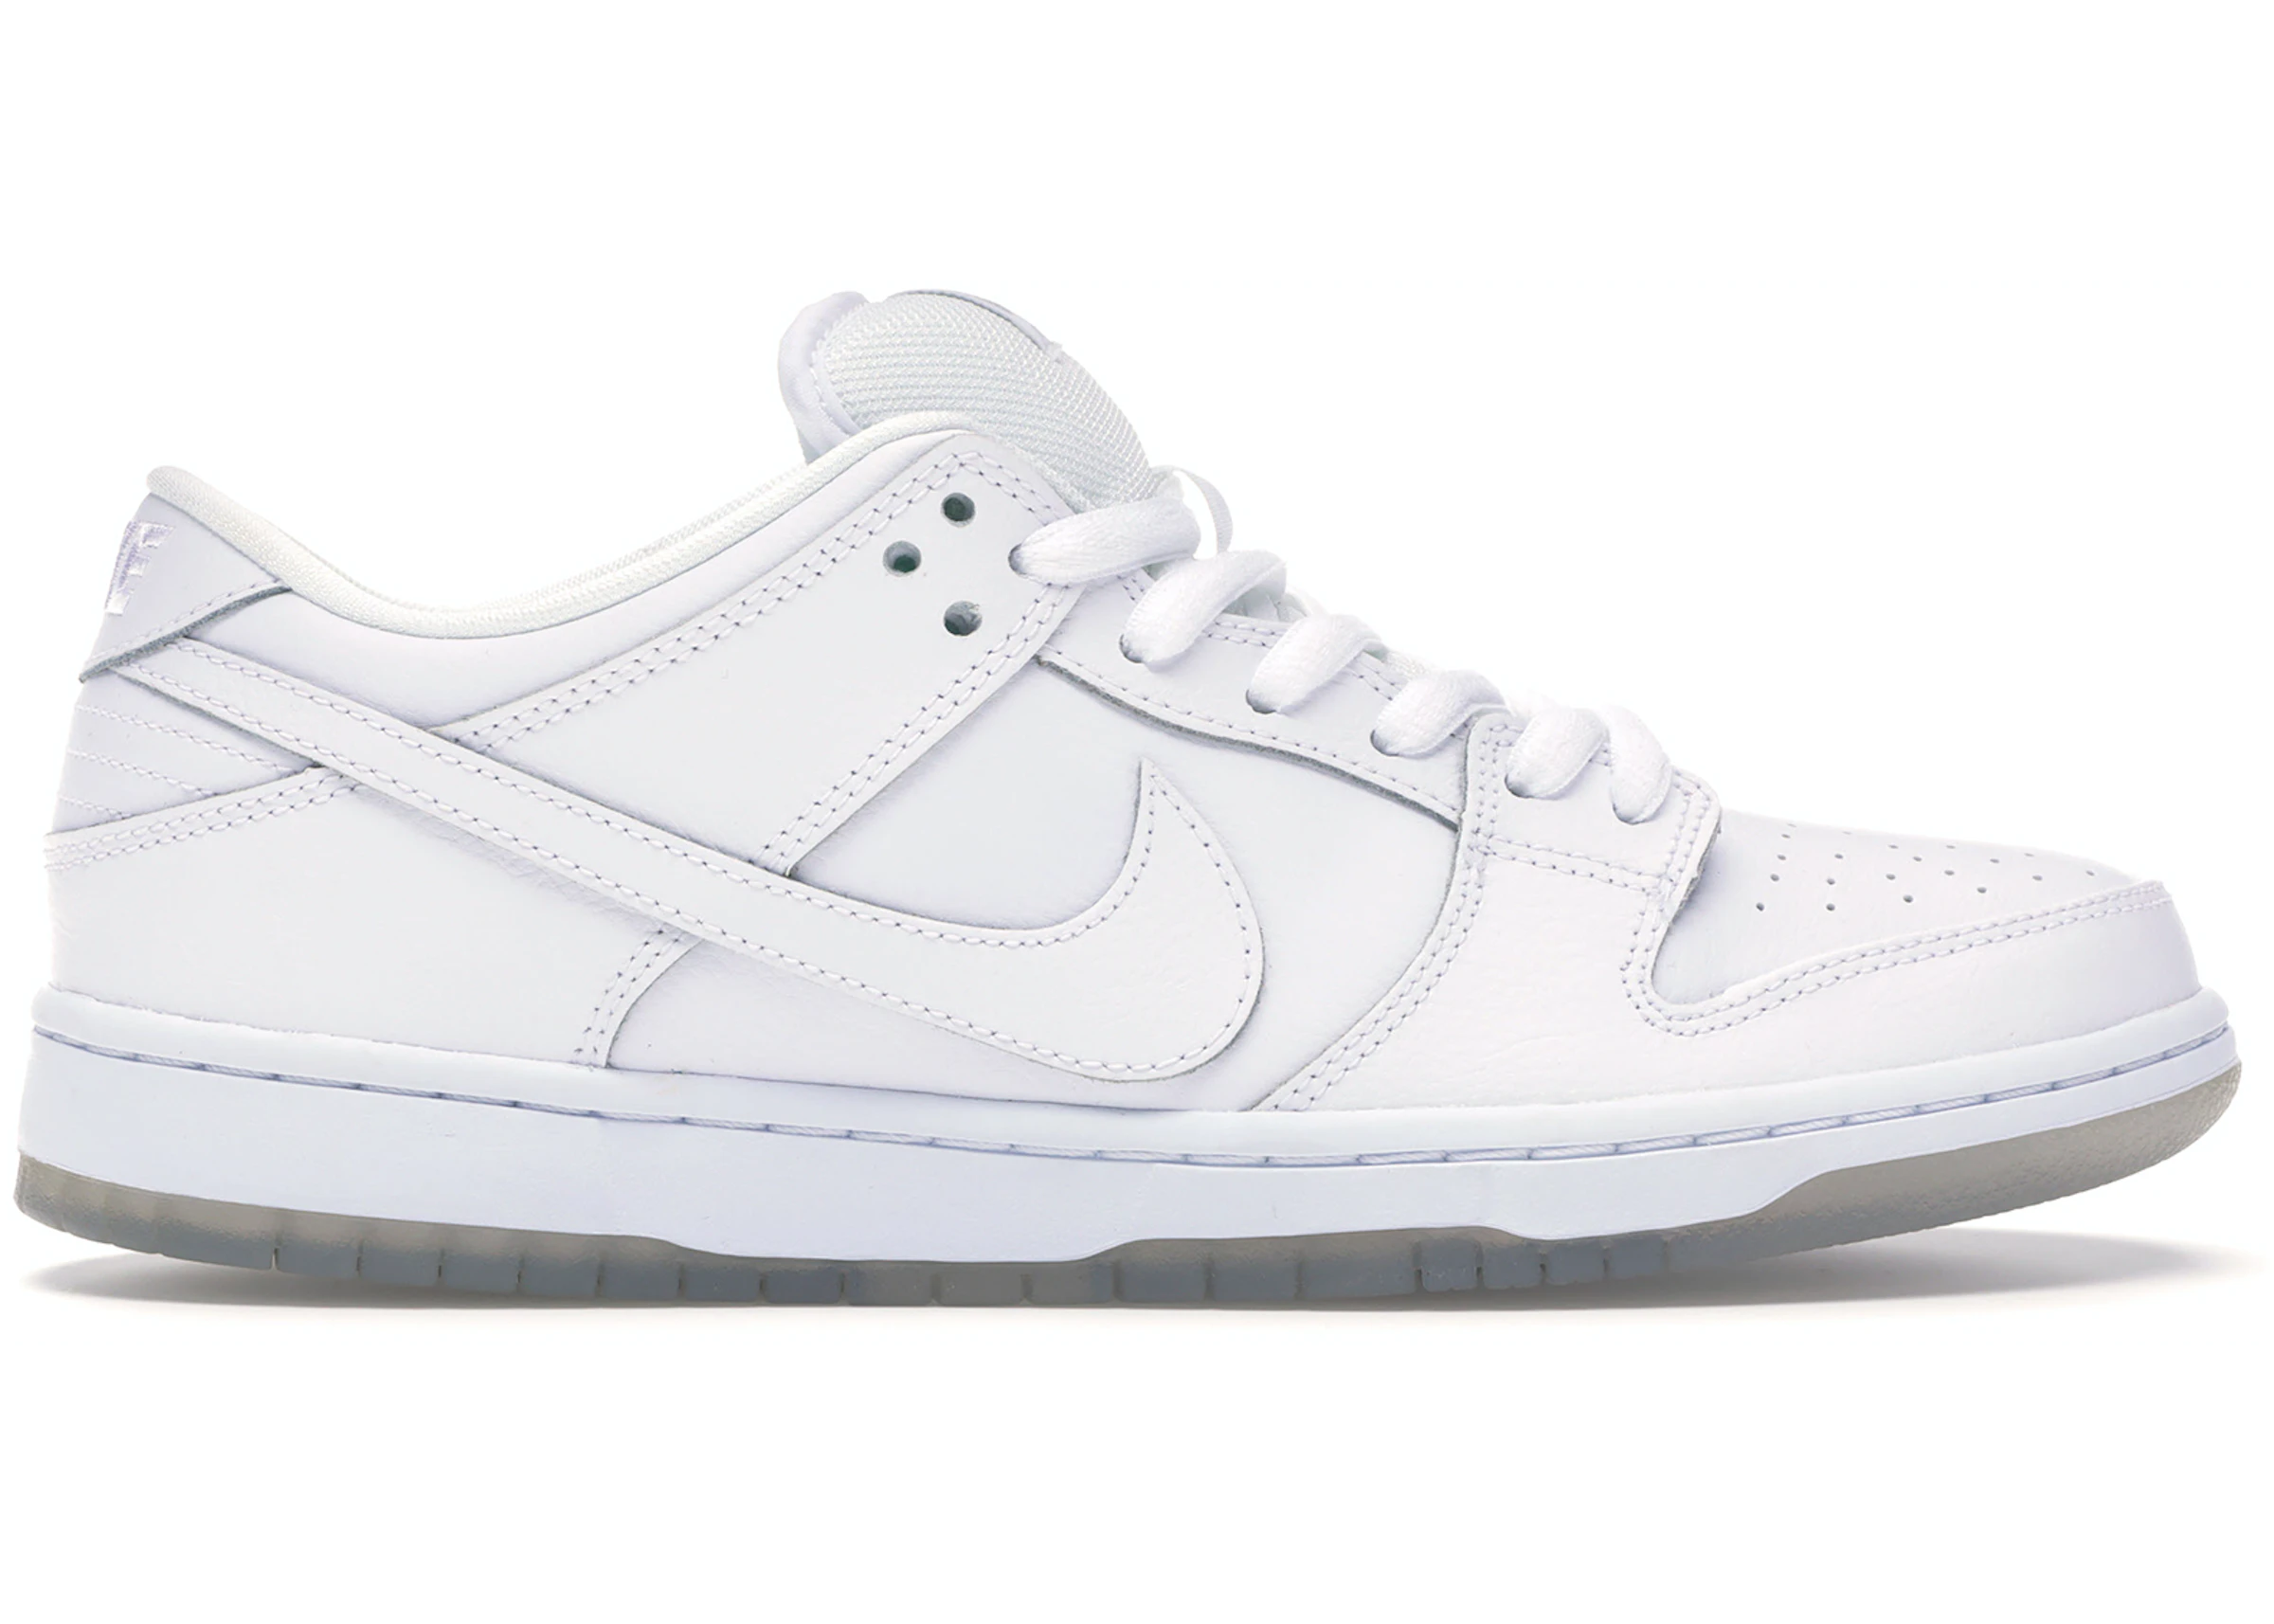 Unreadable director bouquet Nike SB Dunk Low White Ice - 304292-100 - US